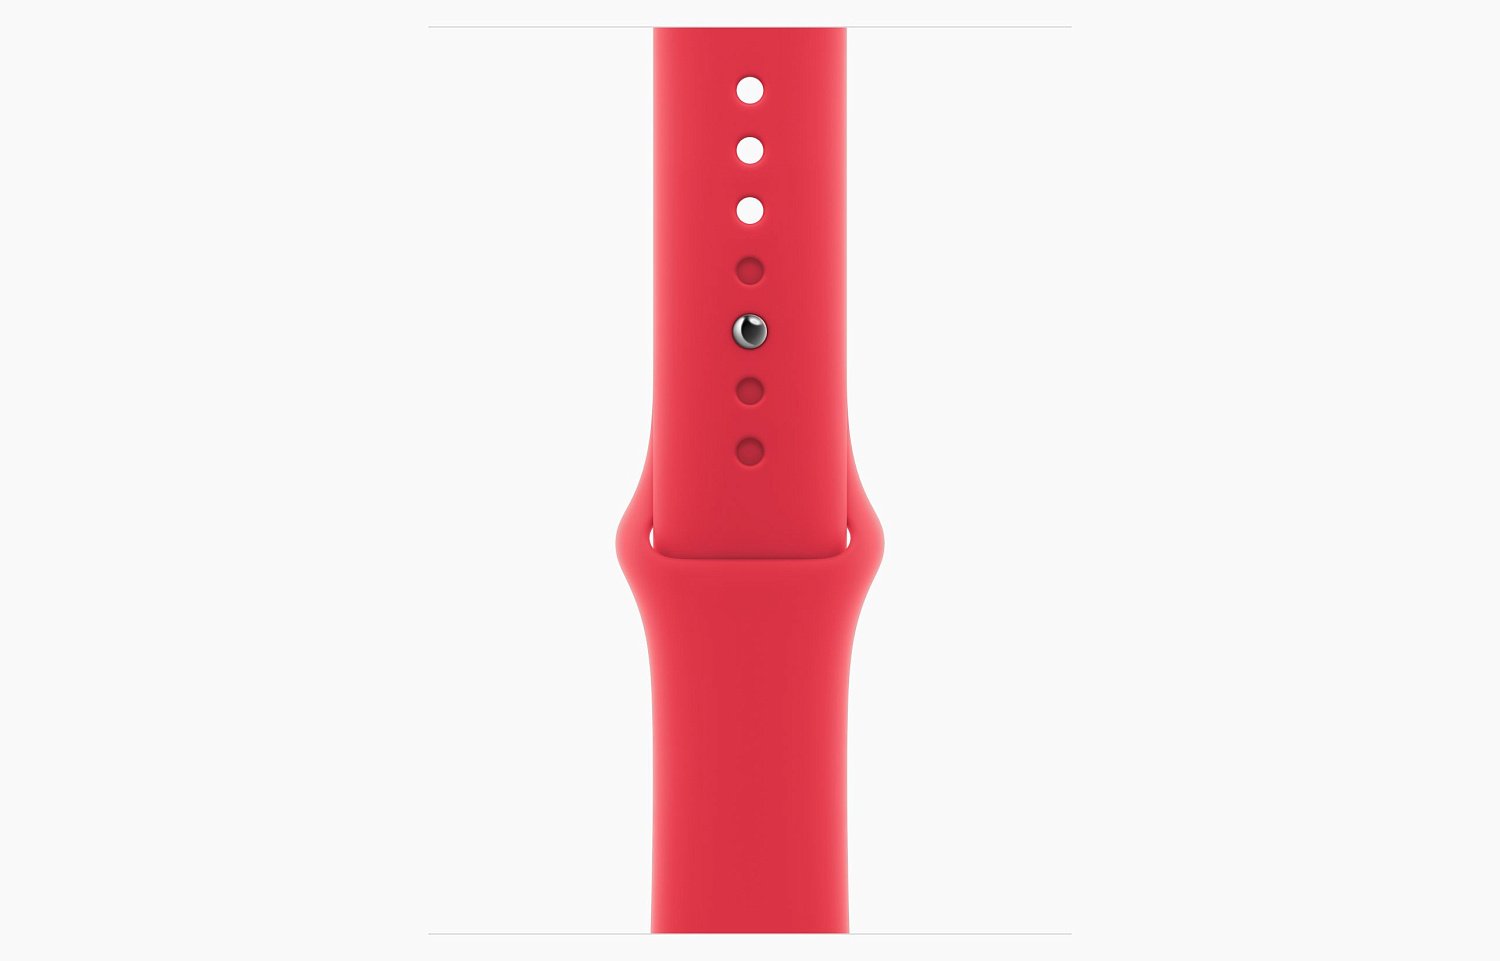 Apple Watch Series 9 GPS 41mm PRODUCT RED Alu. Case w. PRODUCT RED Sport Band - S/M (MRXG3) - ITMag